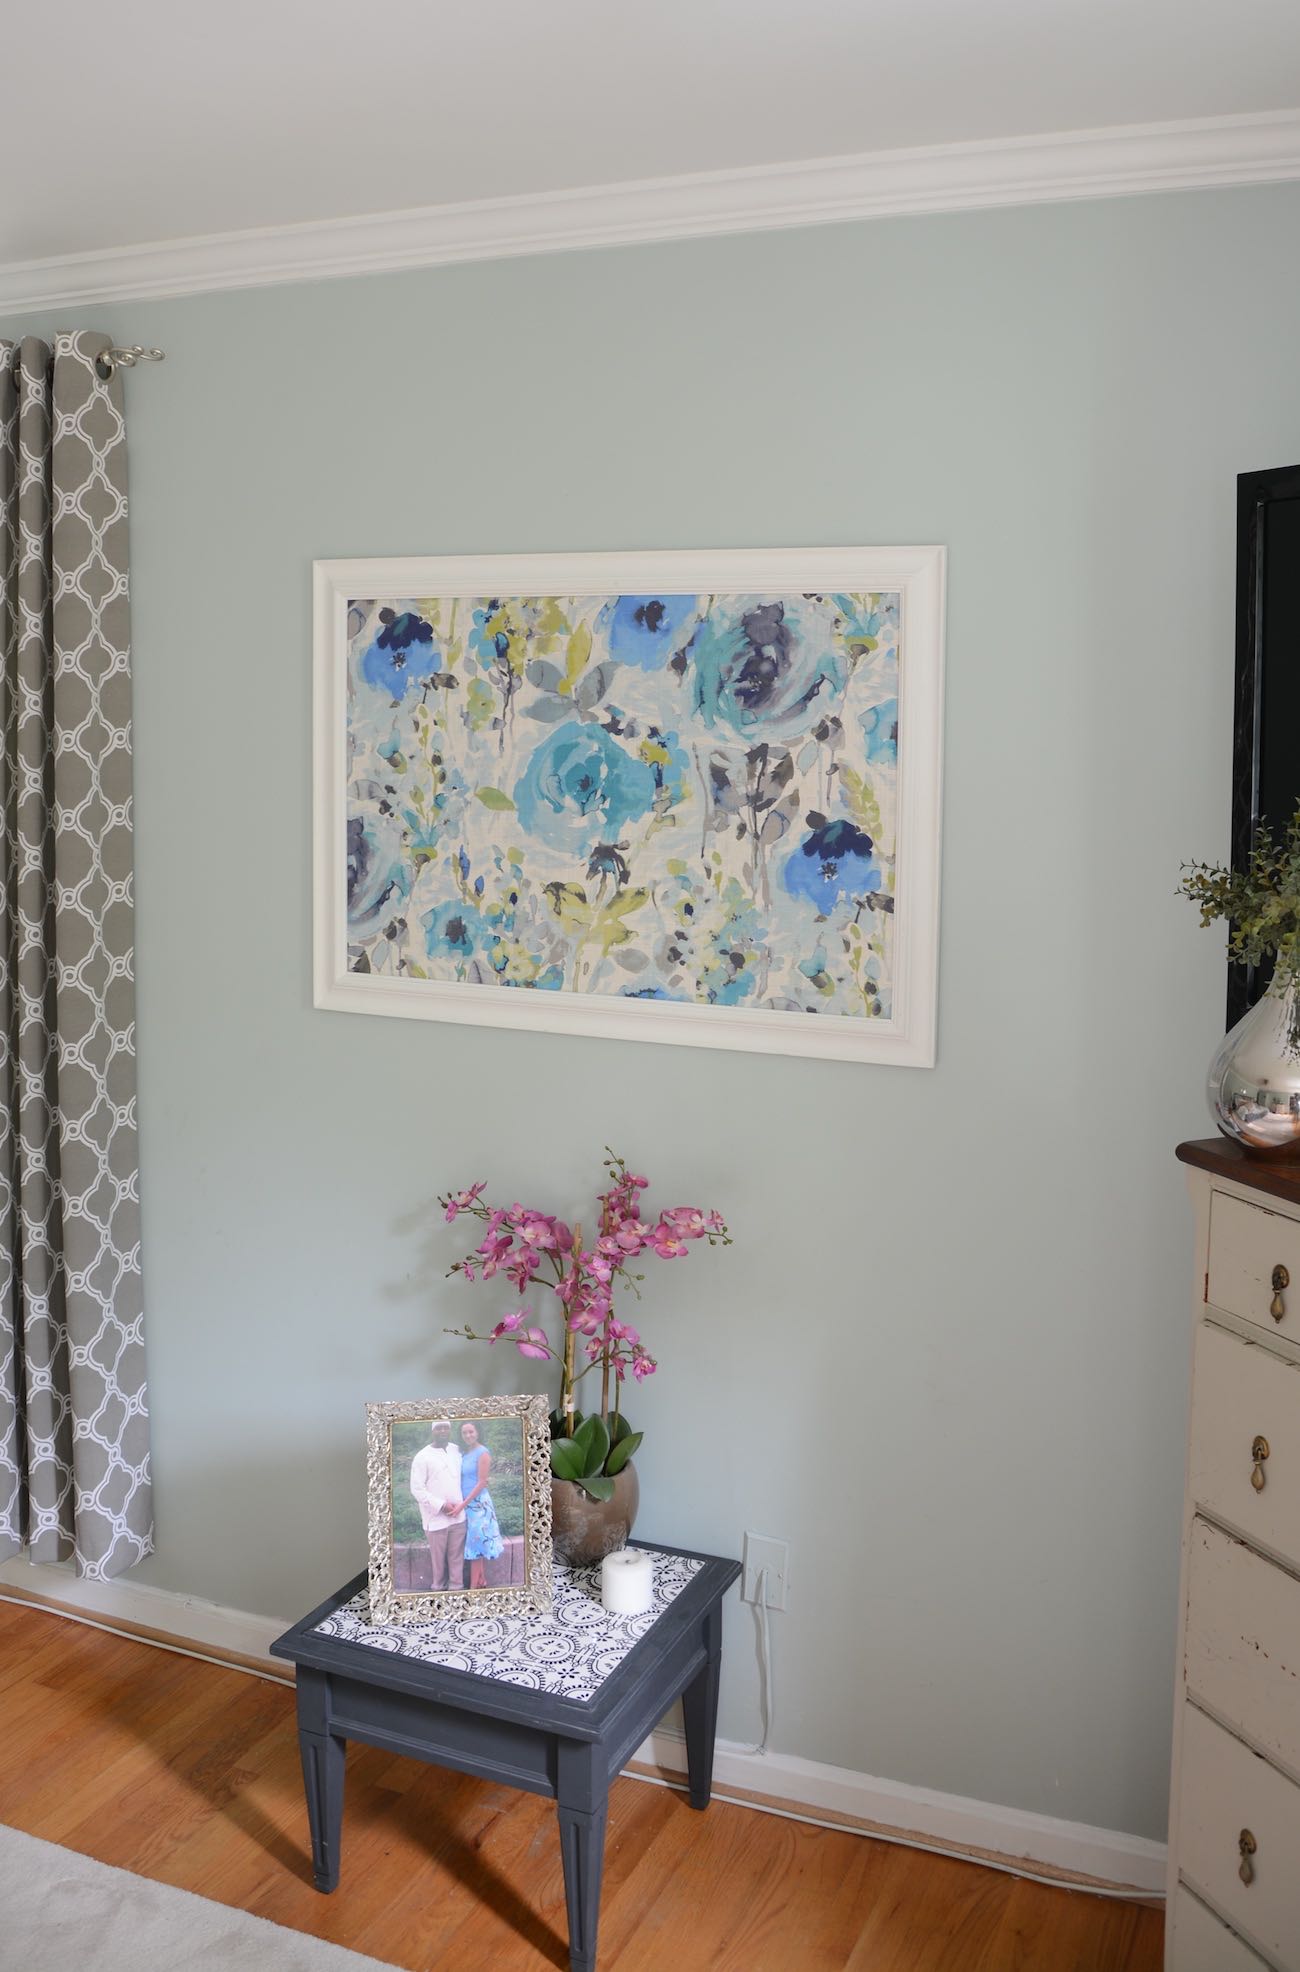 Framed fabric wall art: How to hang your favorite fabric on the wall - Thrift Diving